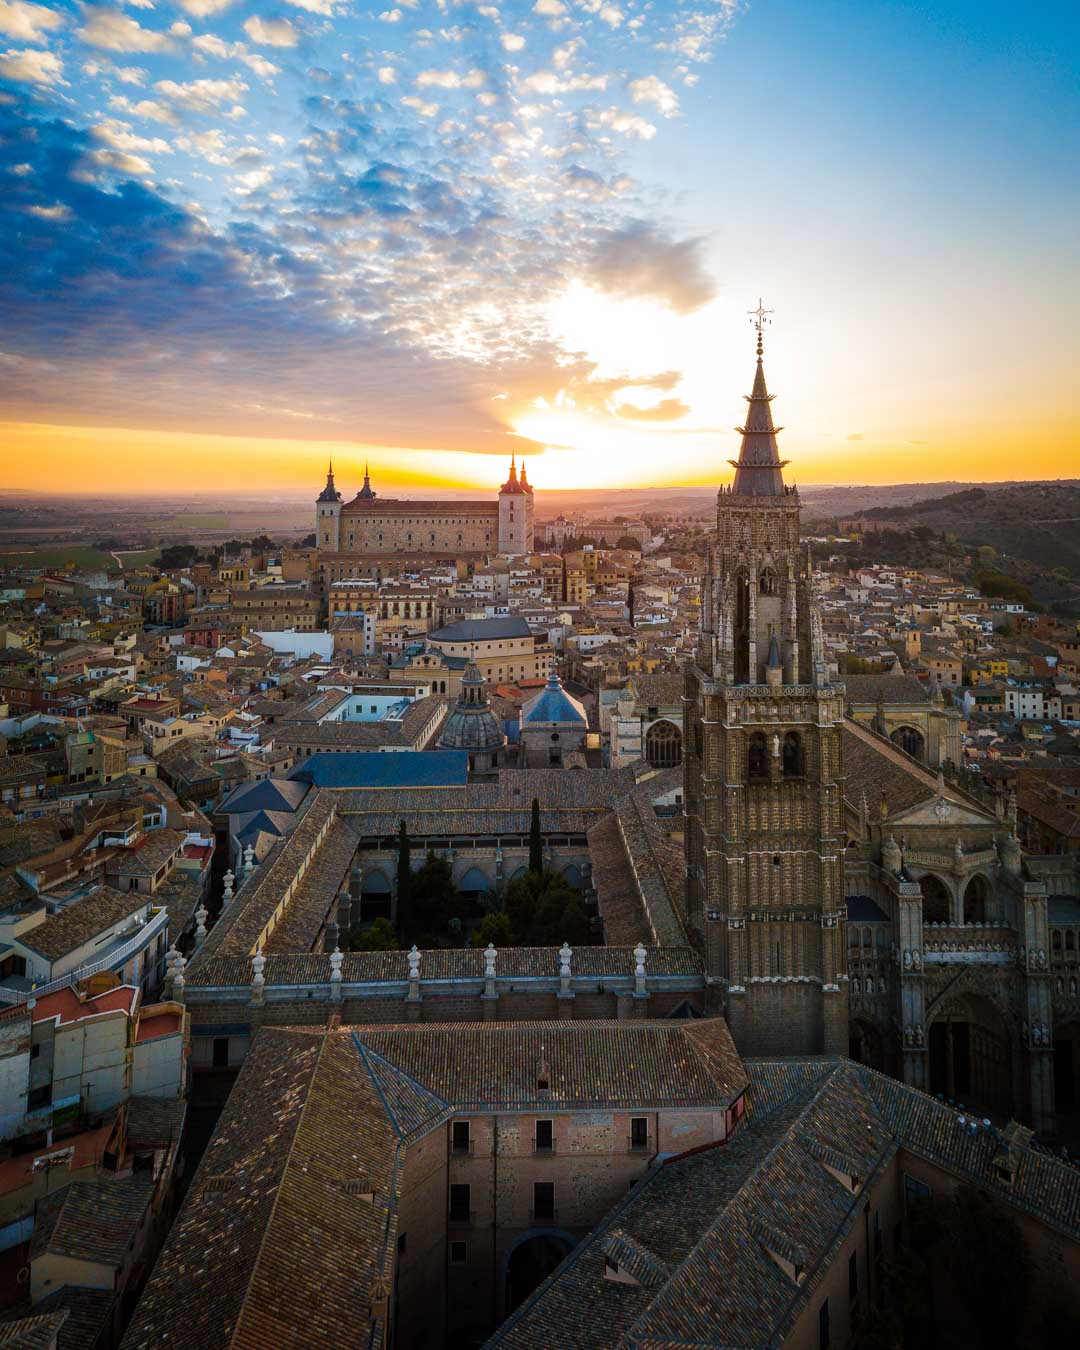 what to do in toledo spain? visit the catedral de toledo as seen here from above